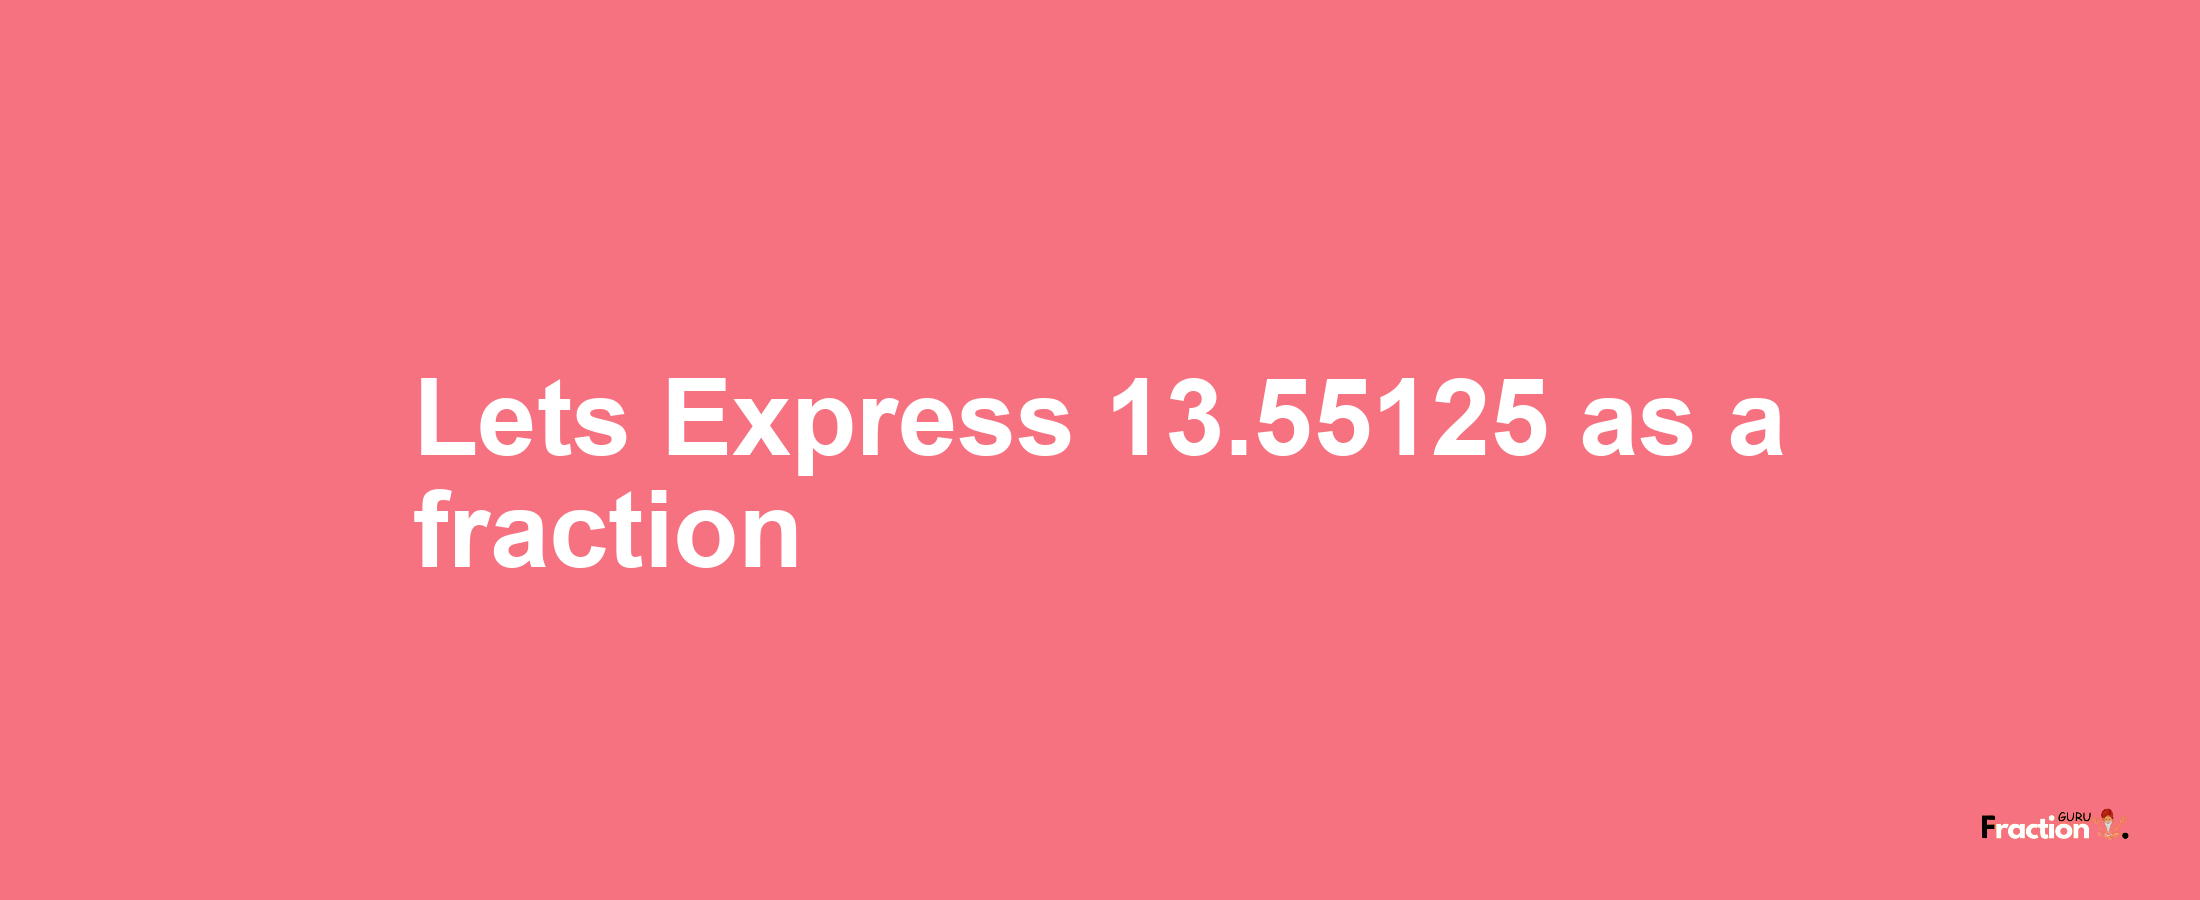 Lets Express 13.55125 as afraction